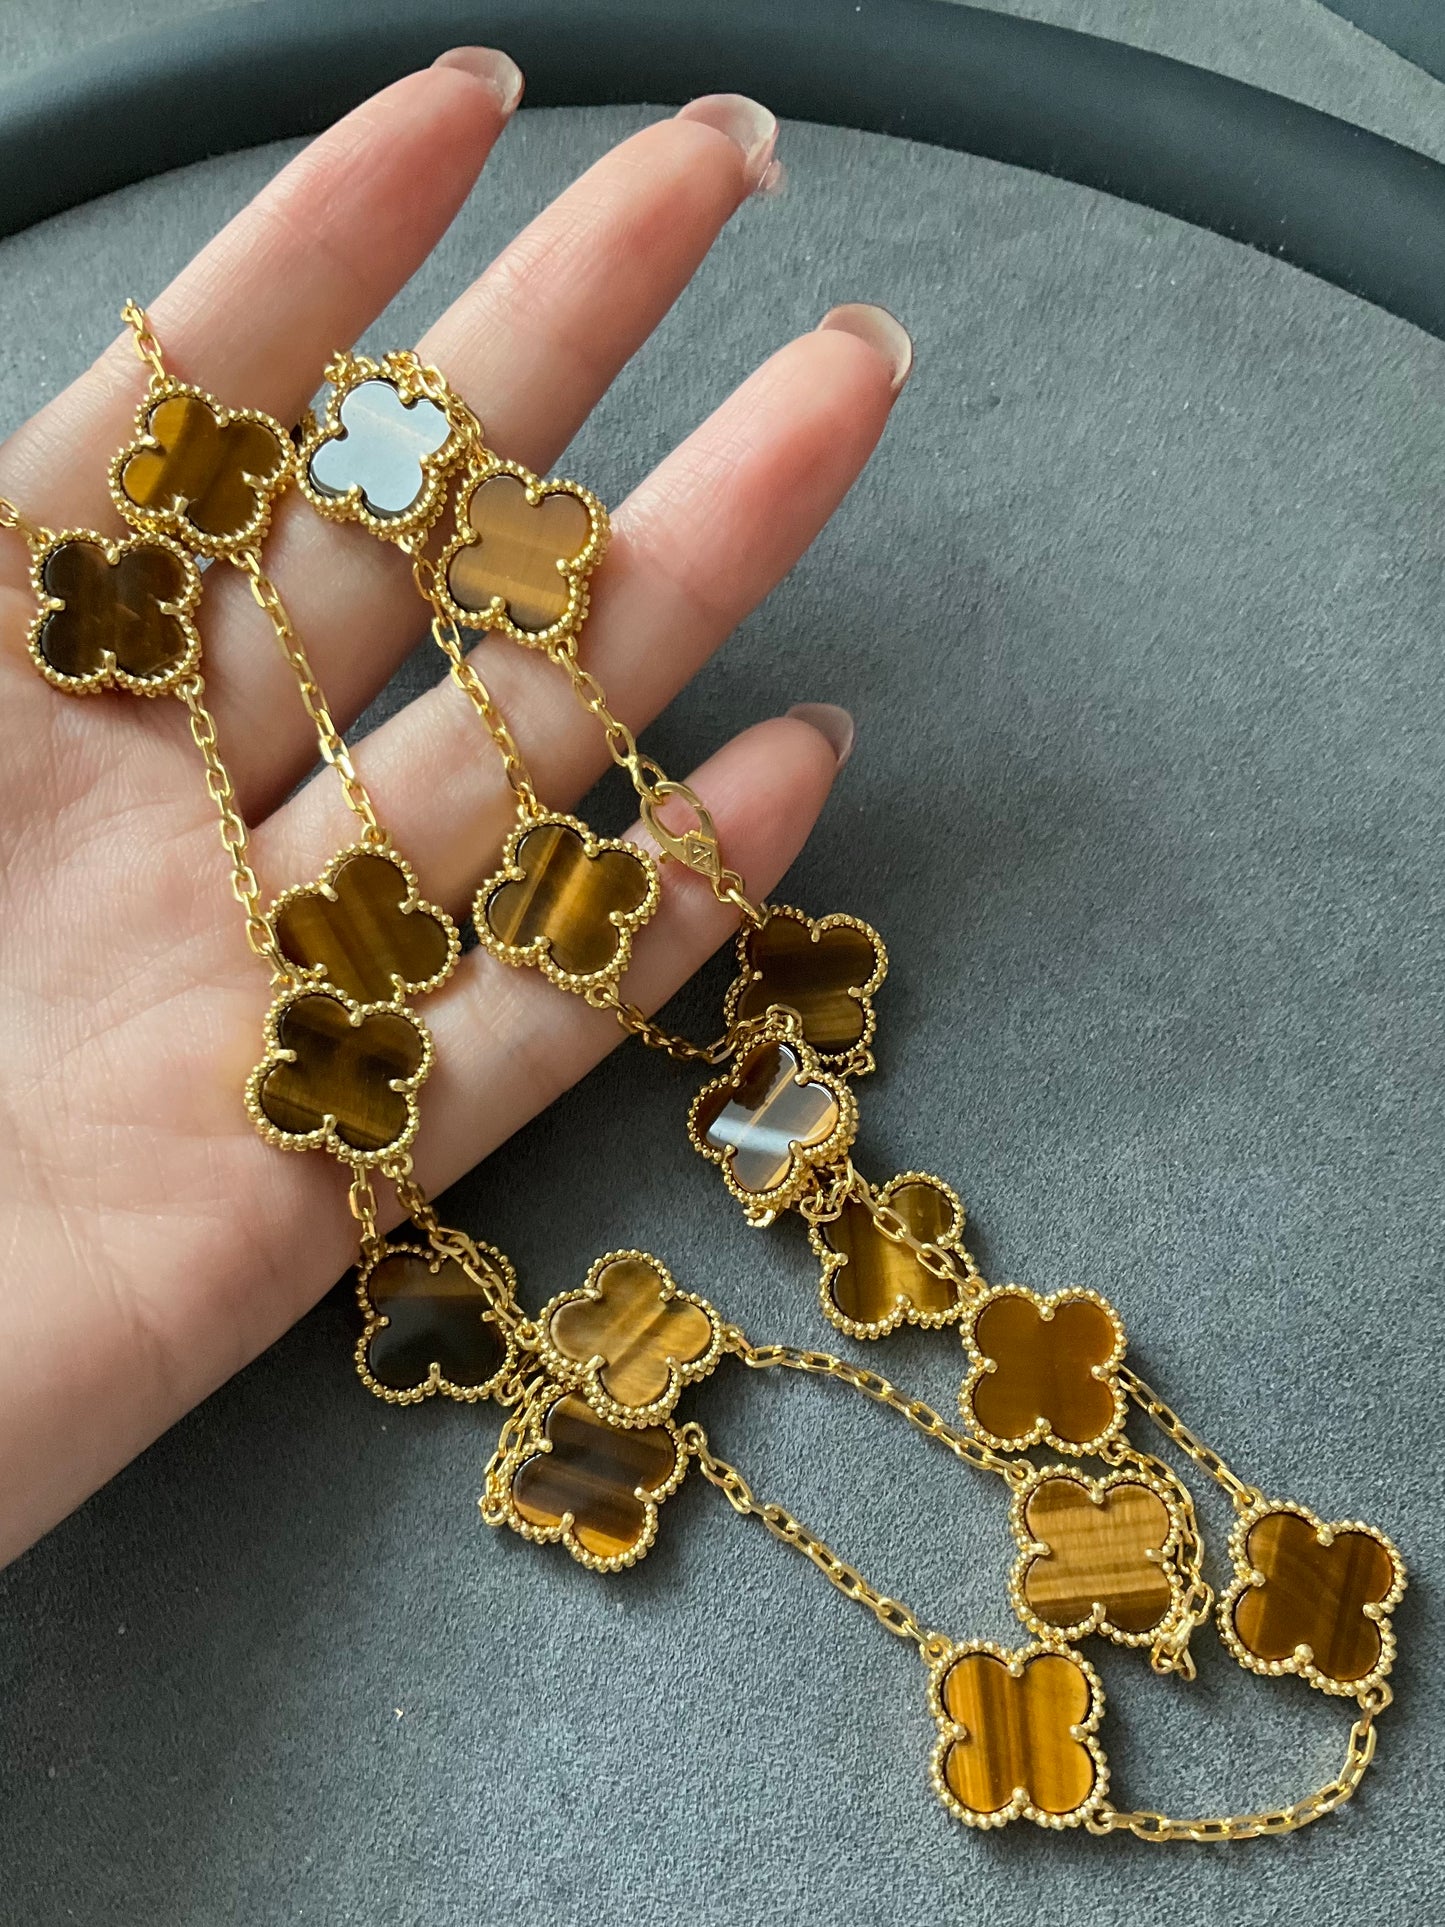 20 motifs Tigers eye Gold Plated Four Leaf Clover Flower Style S 925 Silver Necklace 84cm - ParadiseKissCo